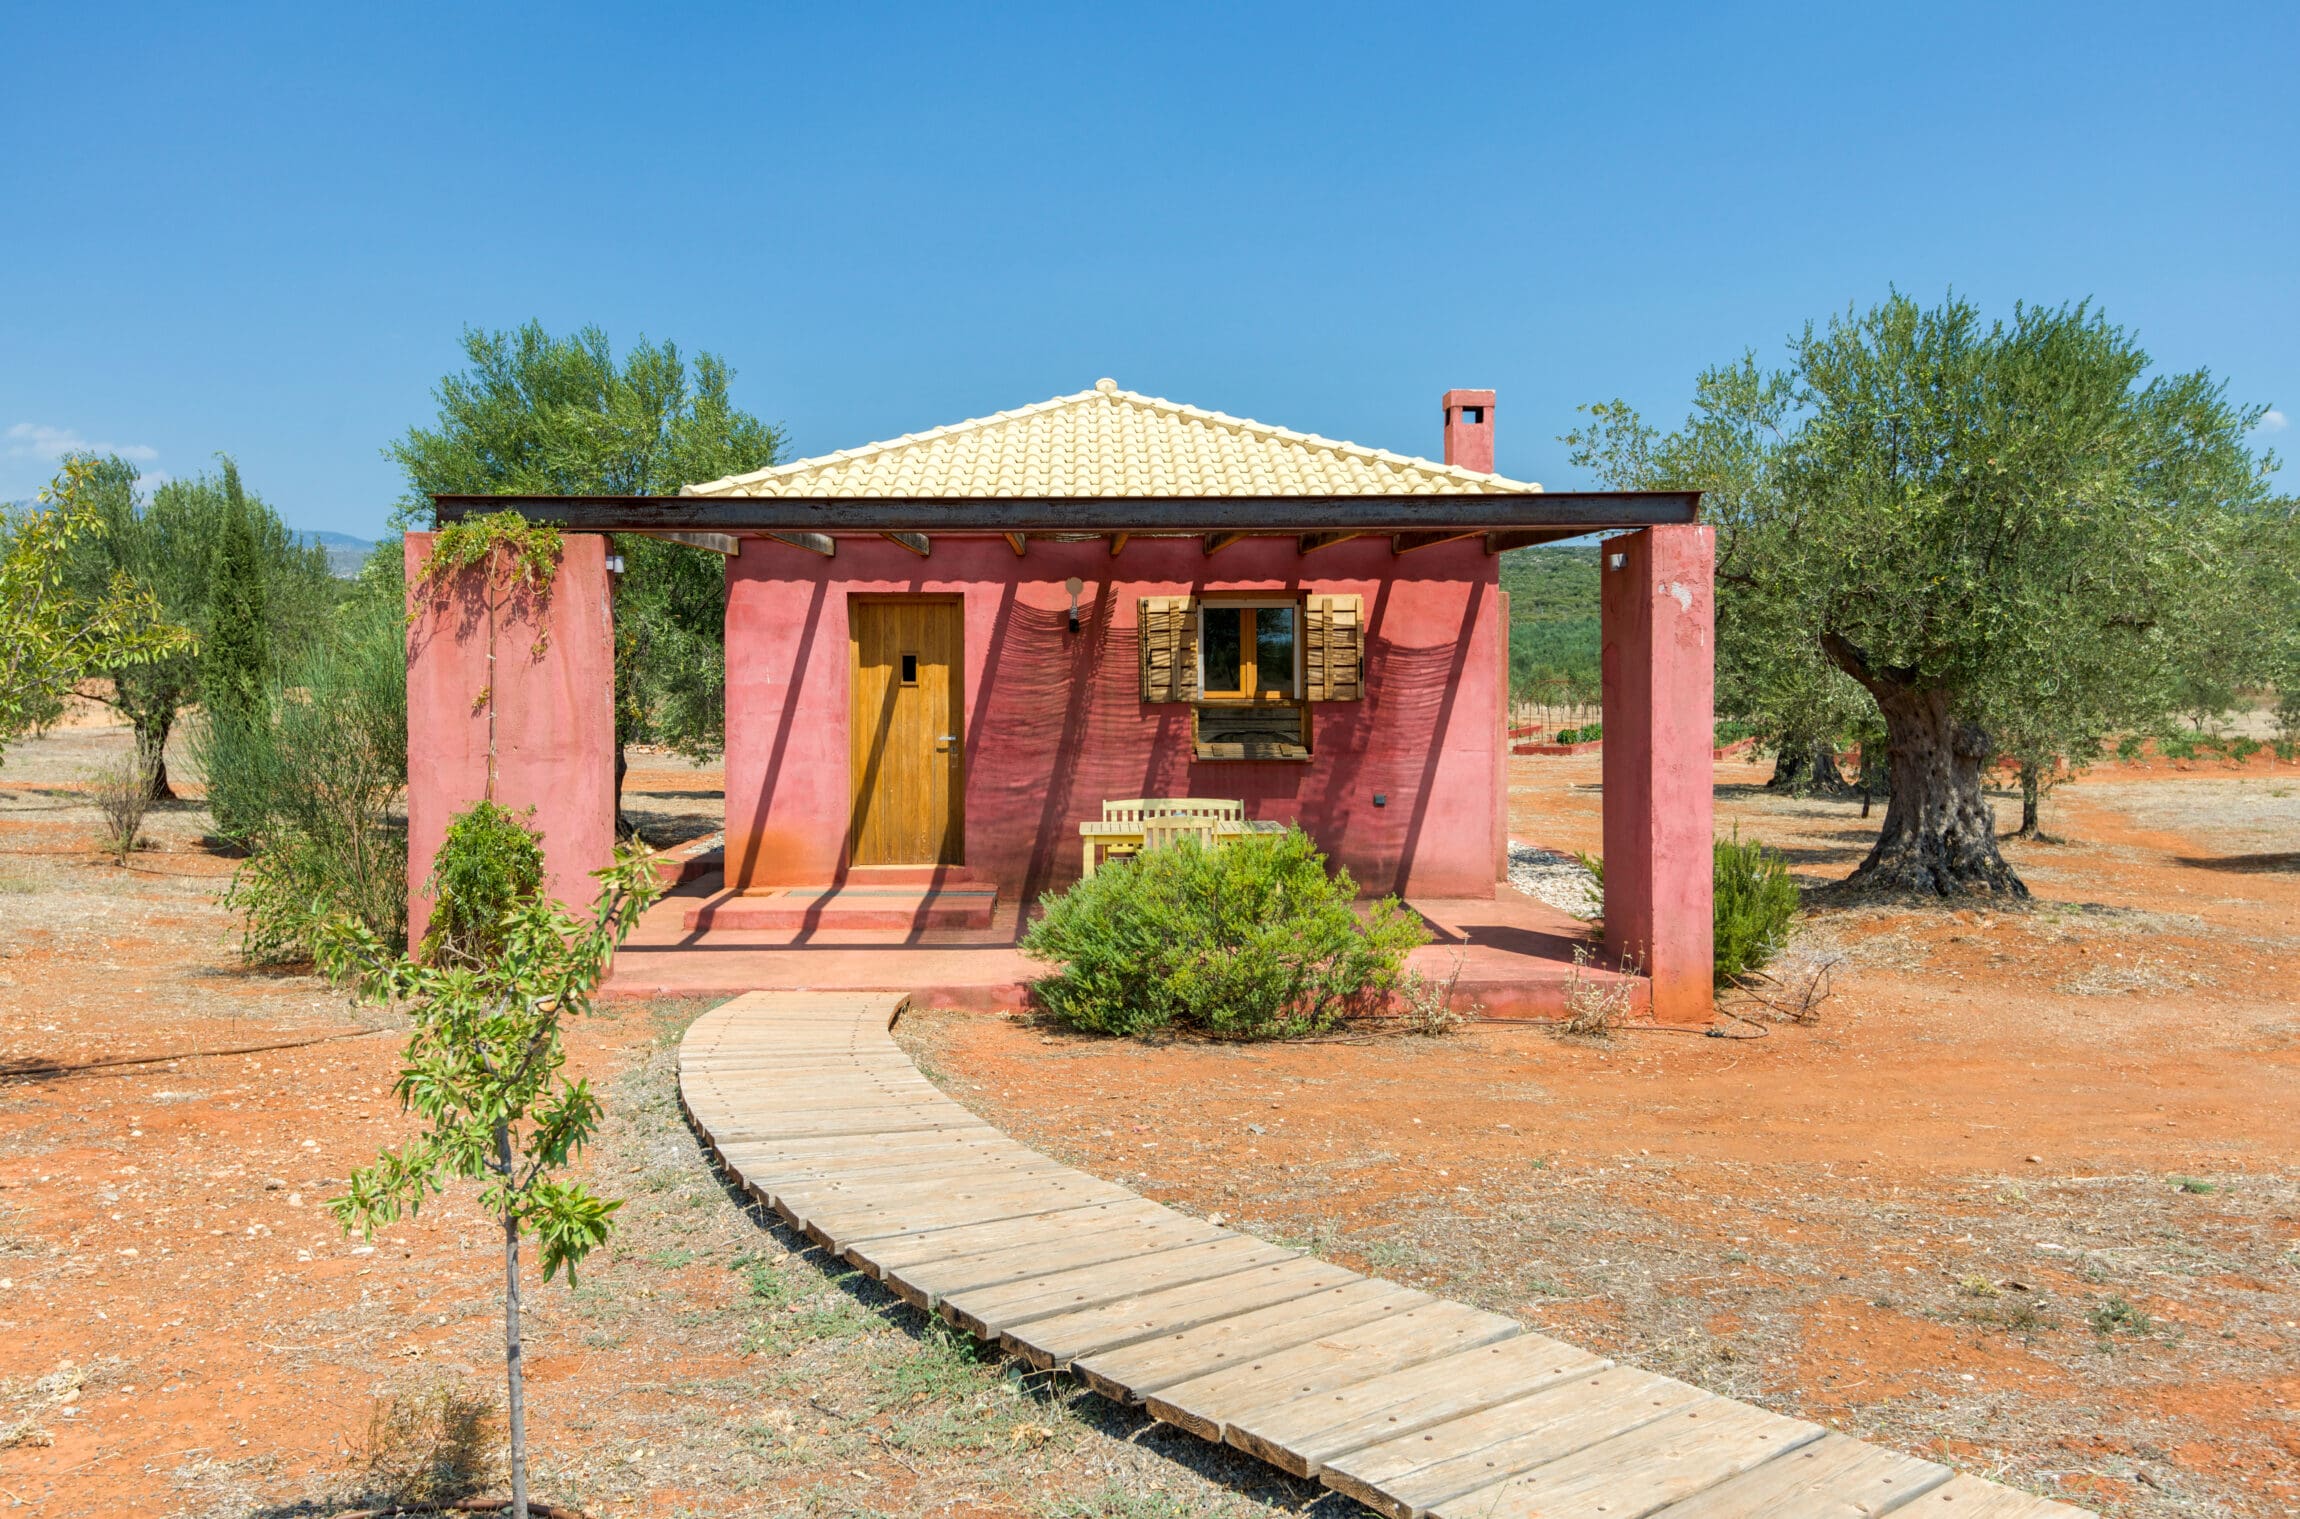 The best farm stays in Europe | The rustic pink exterior of Eumelia Organic Agrotourism Farm, Greece